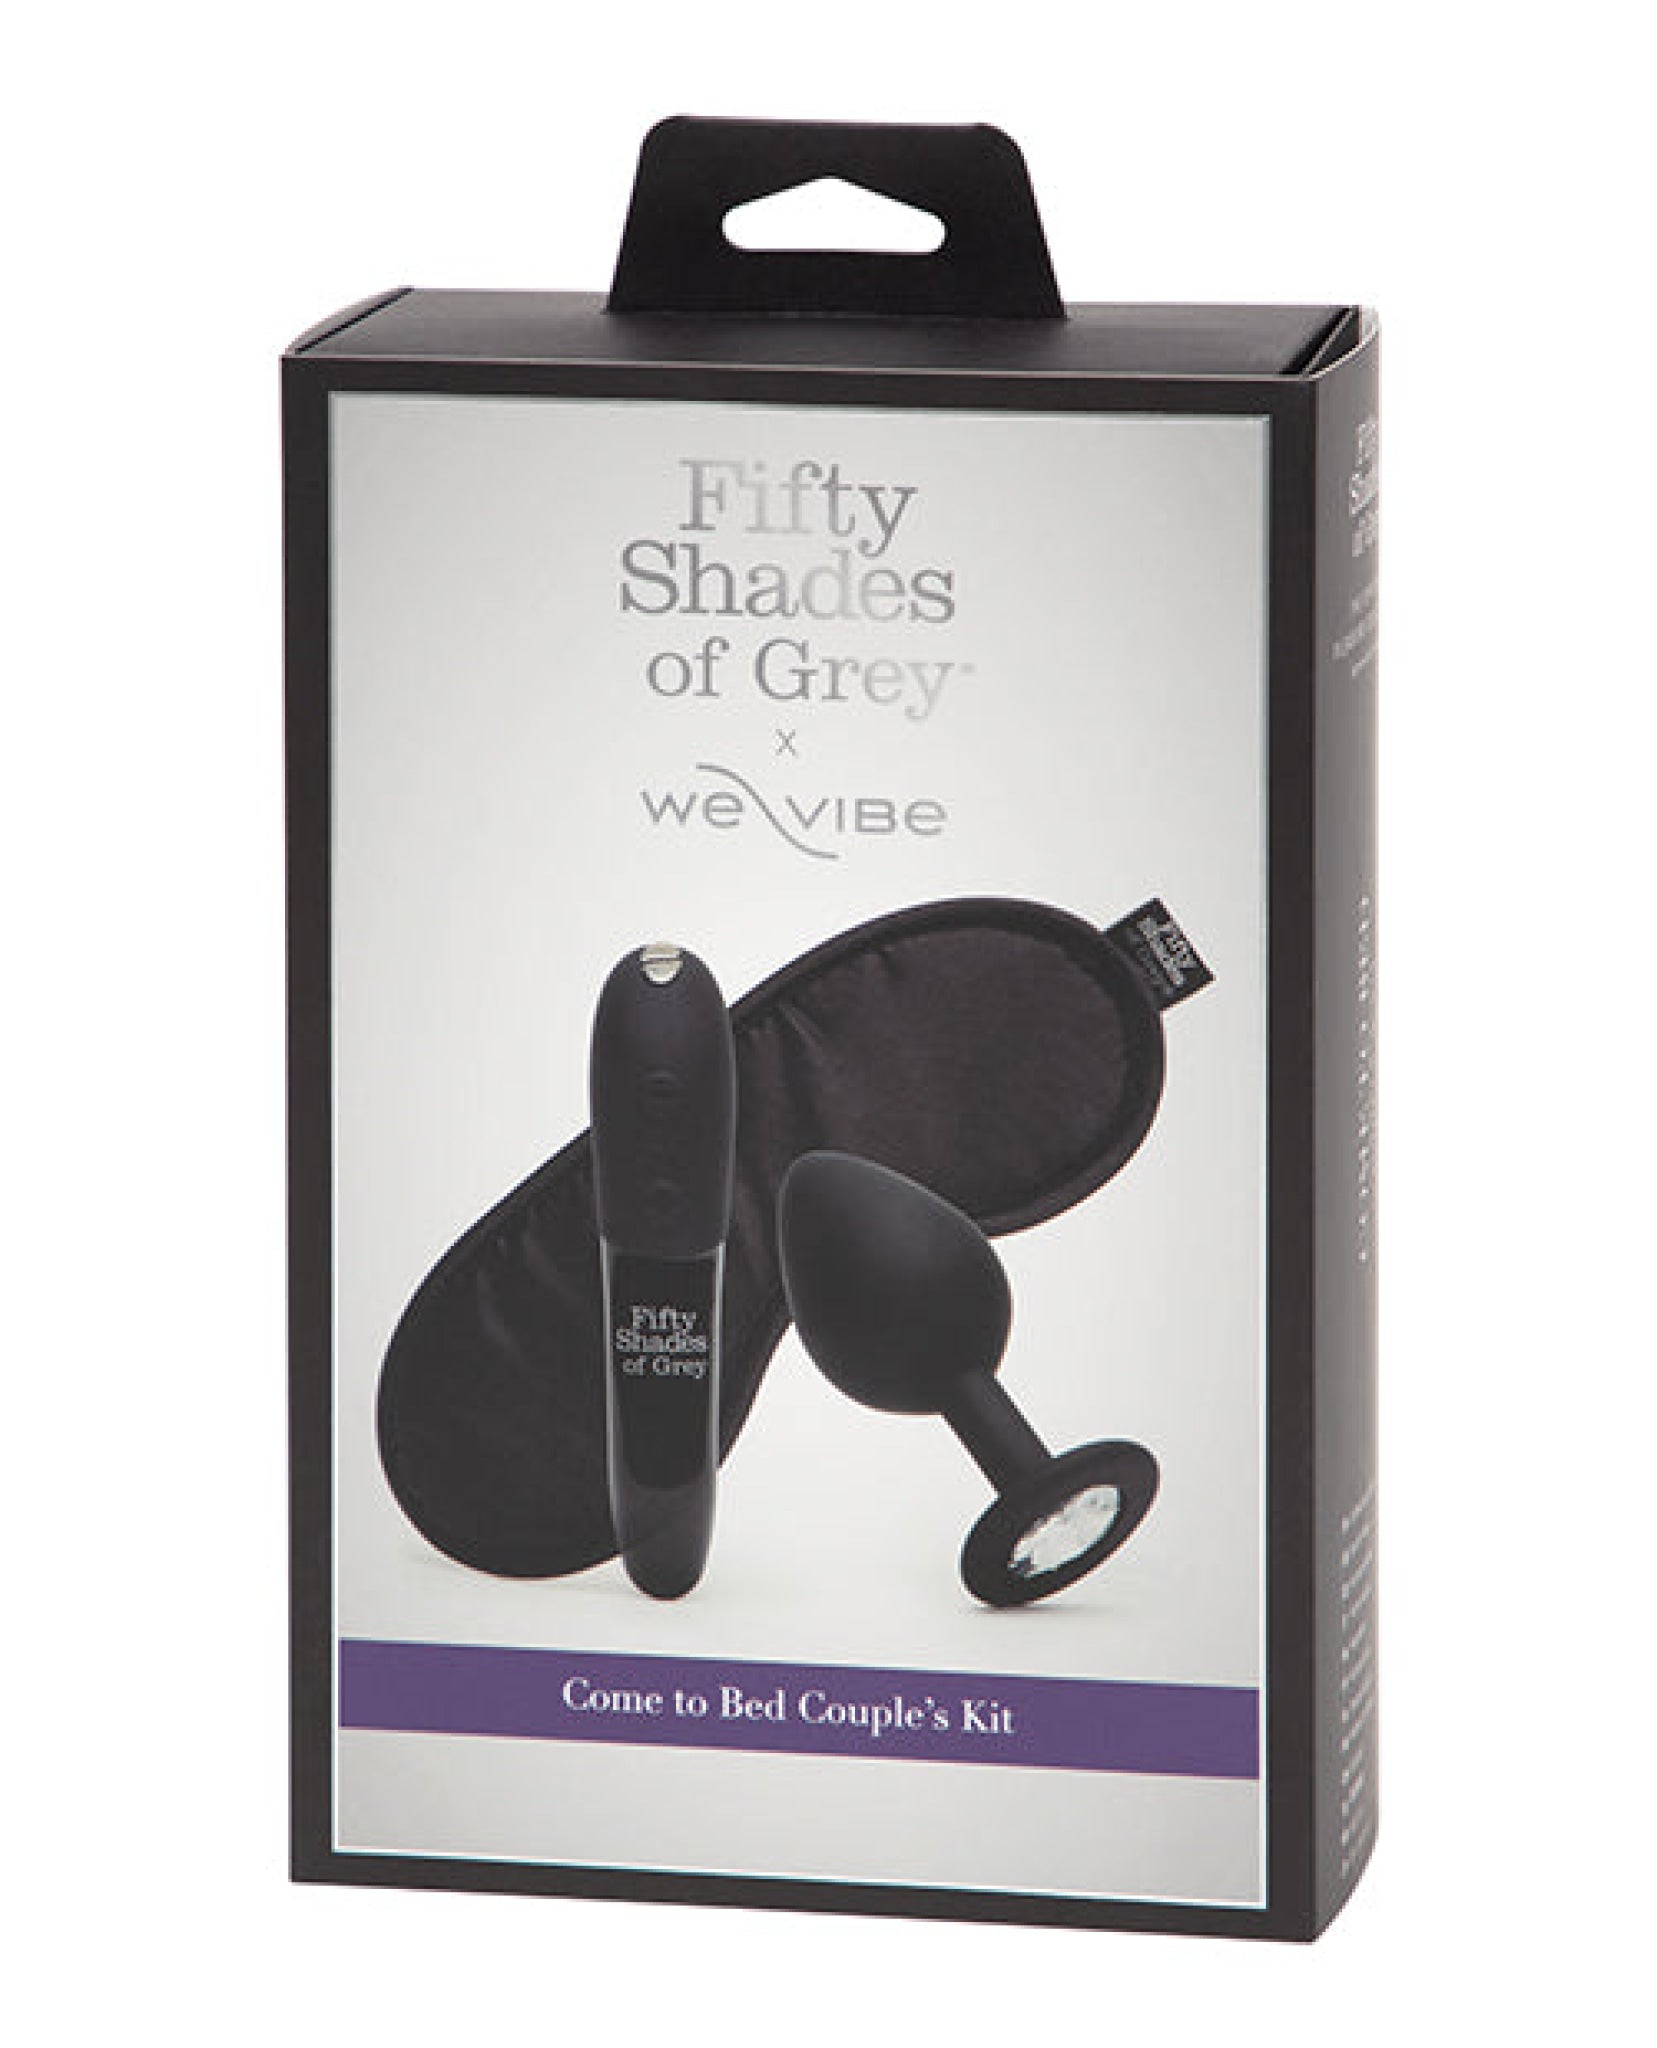 Fifty Shades Of Grey & We-vibe Come To Bed Kit Lovehoney C/o Wow Tech